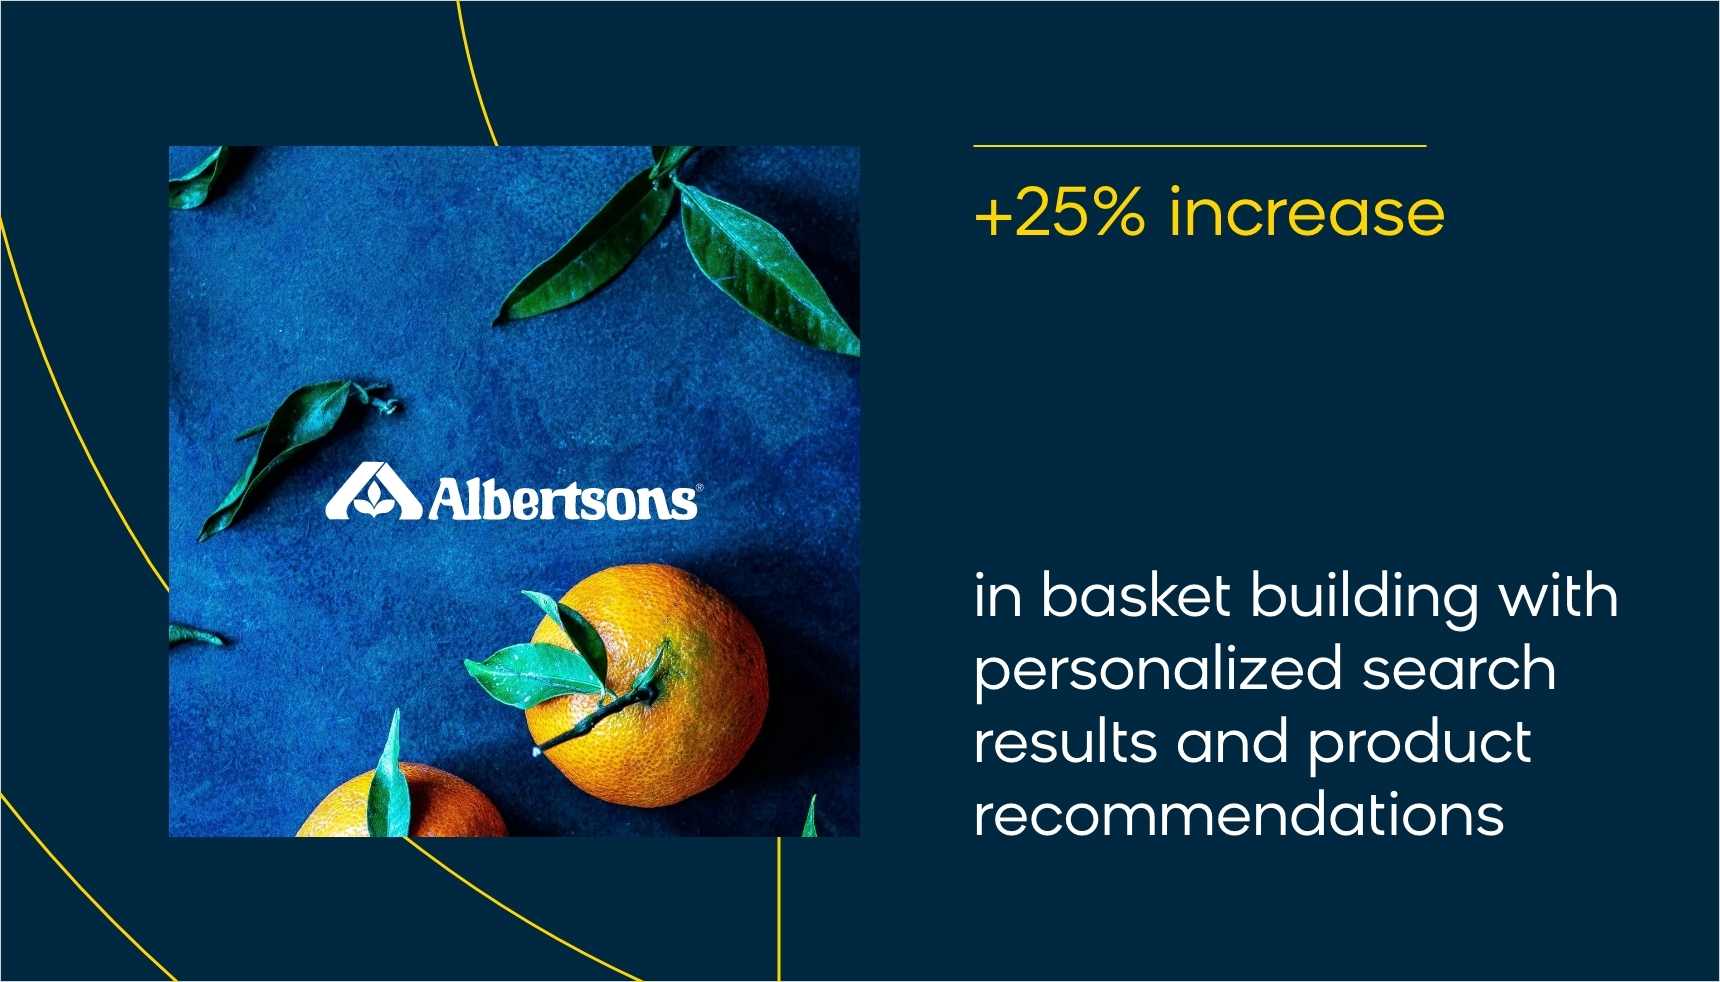 Grocery store Albertsons delivers precise, relevant, and personalized search results along with product recommendations.